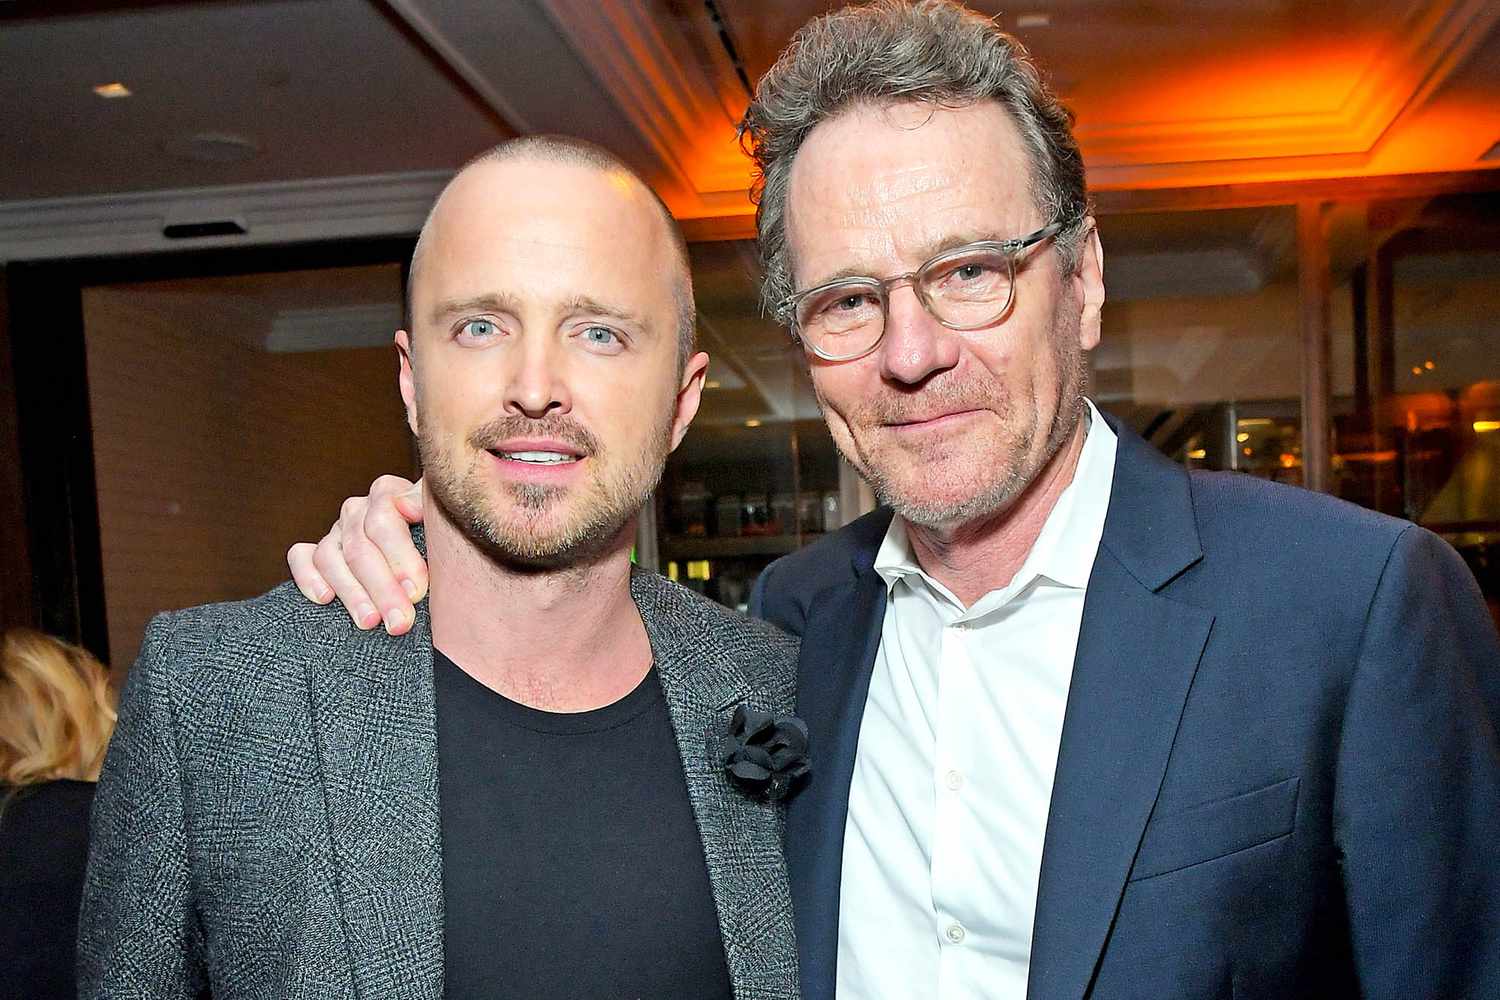 LOS ANGELES, CALIFORNIA - OCTOBER 07: Aaron Paul (L) and Bryan Cranston attend the after party for the World Premiere of "El Camino: A Breaking Bad Movie" at Baltaire Restaurant on October 07, 2019 in Los Angeles, California. (Photo by Charley Gallay/Getty Images for Netflix)